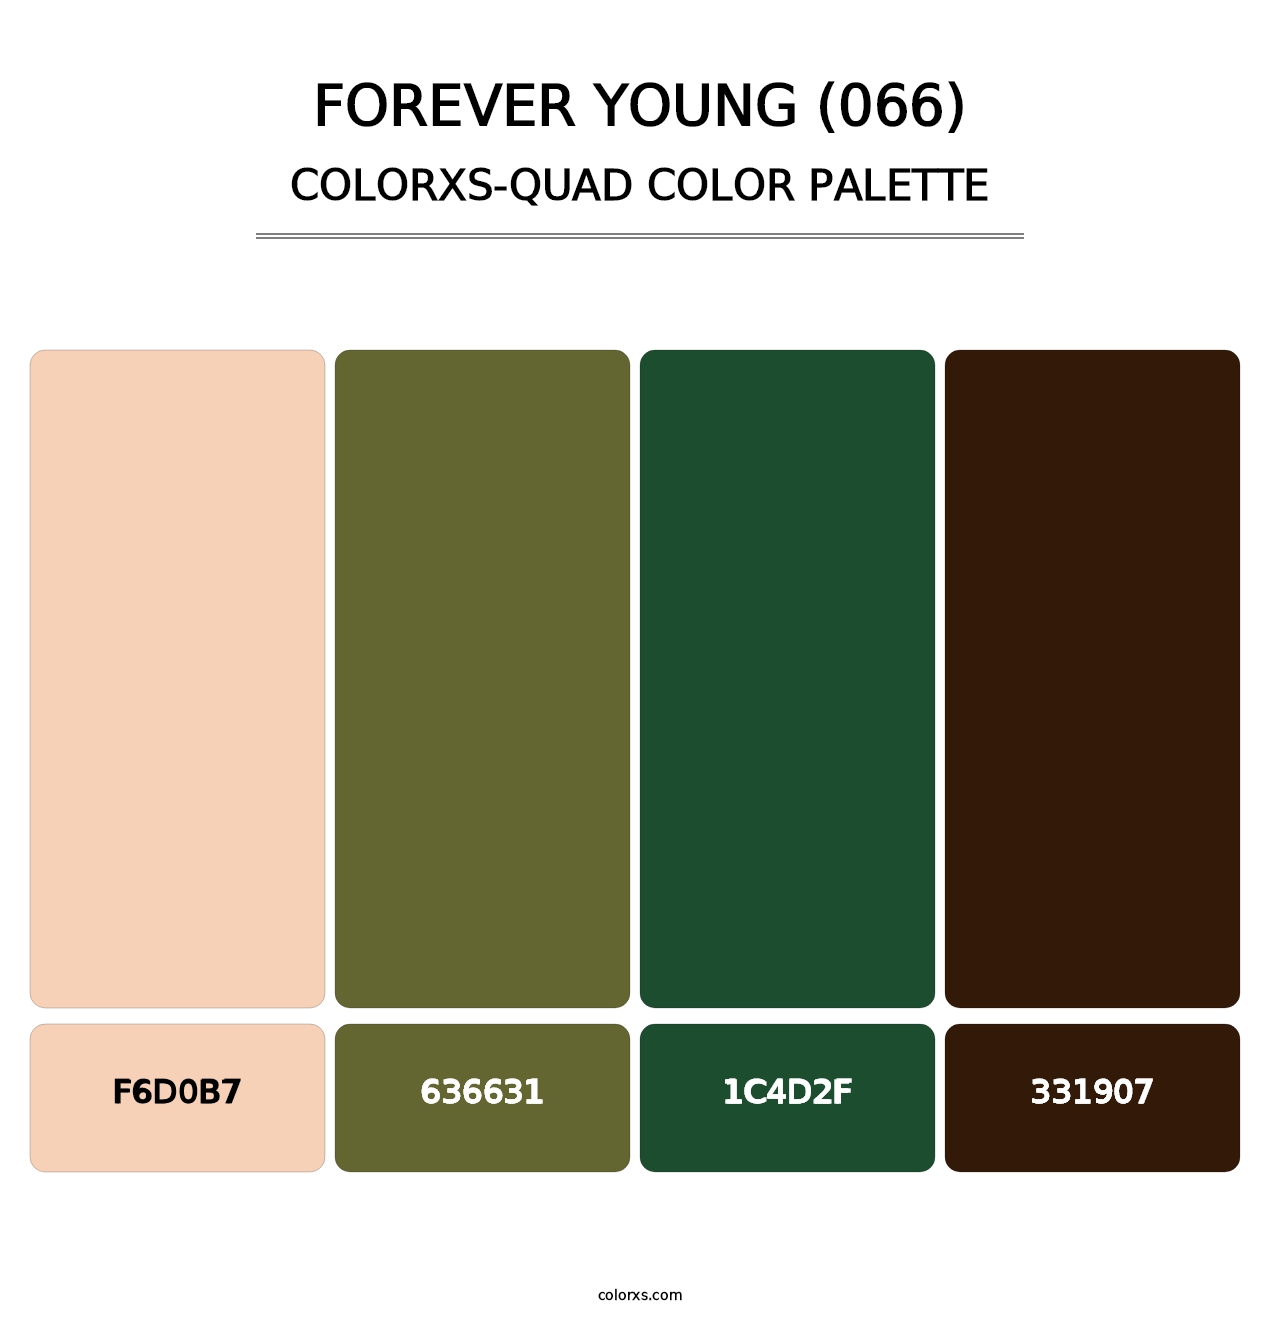 Forever Young (066) - Colorxs Quad Palette